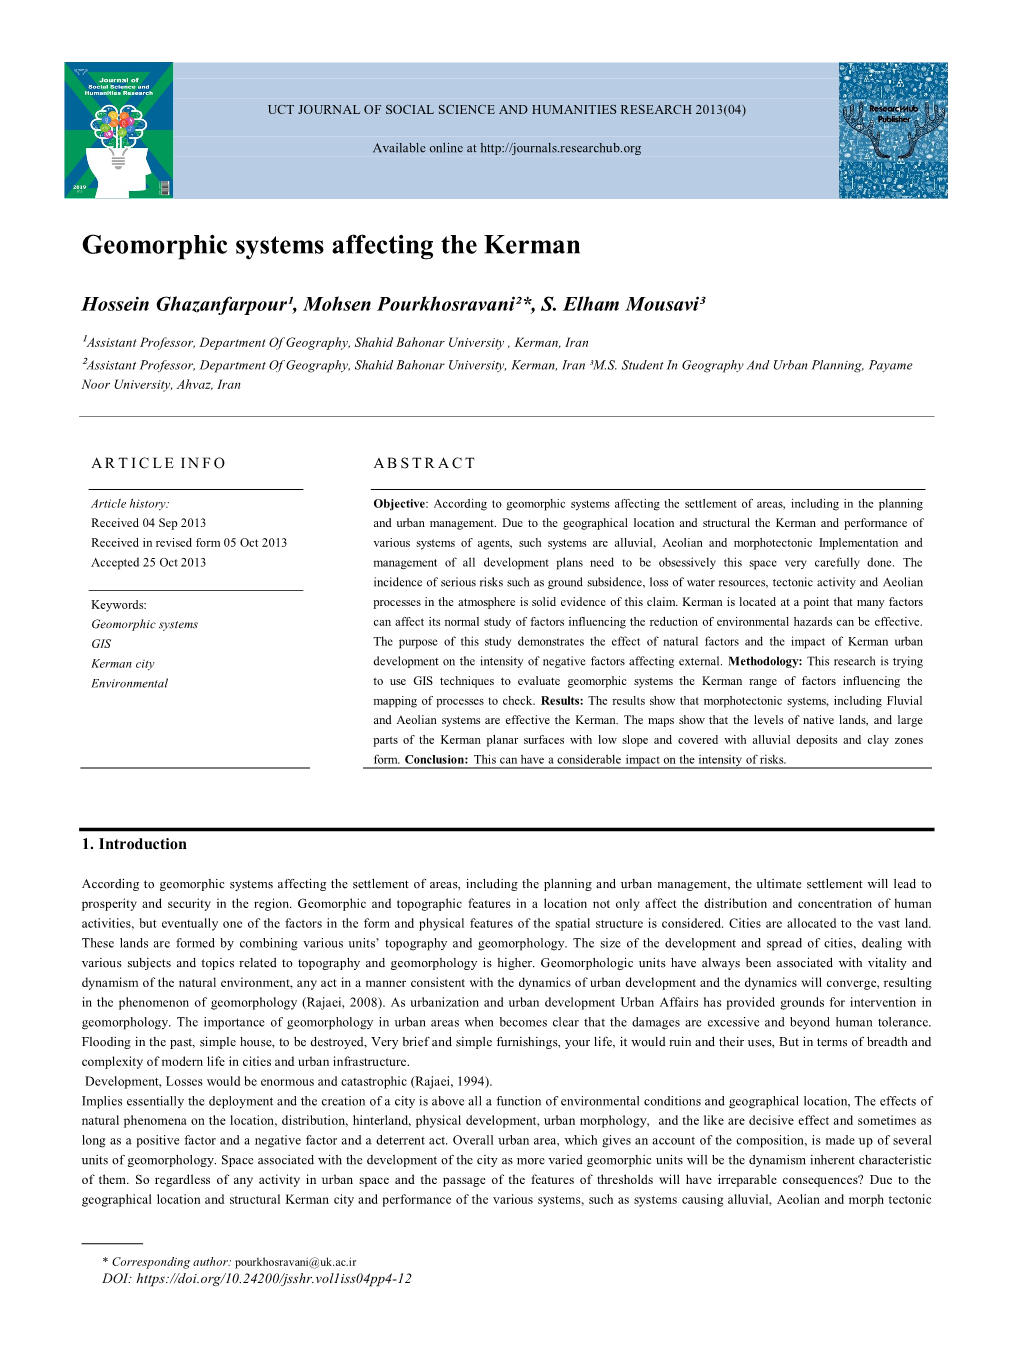 Geomorphic Systems Affecting the Kerman